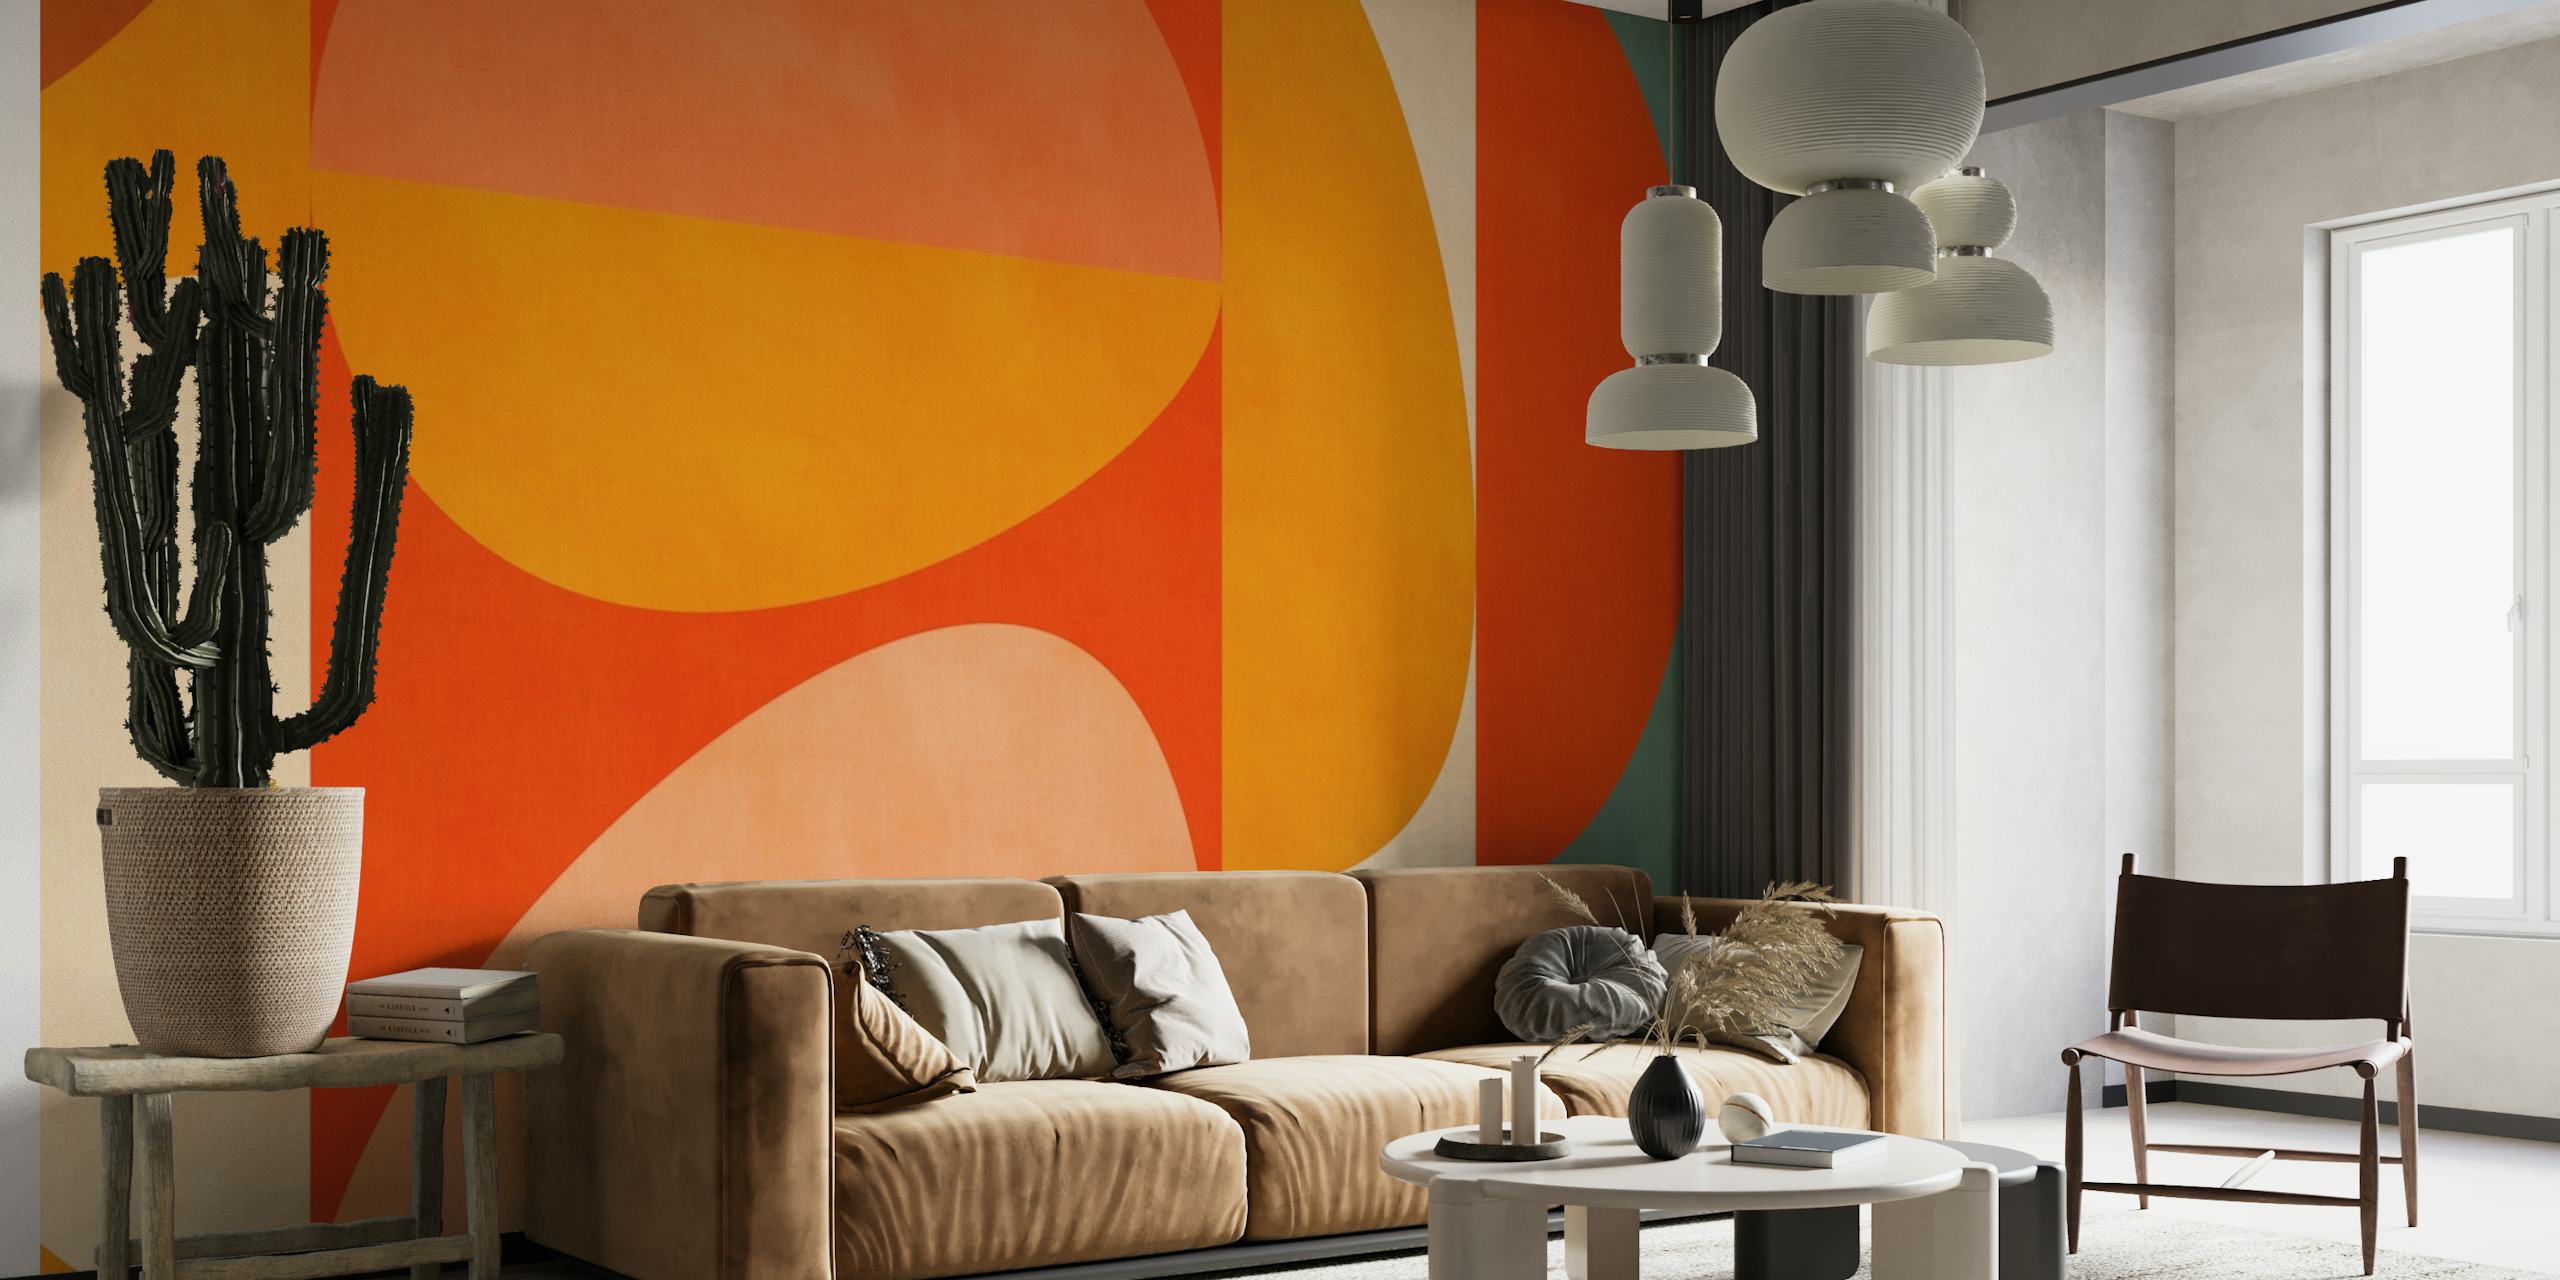 Mid century modern rounded shapes 3:4 ratio ταπετσαρία